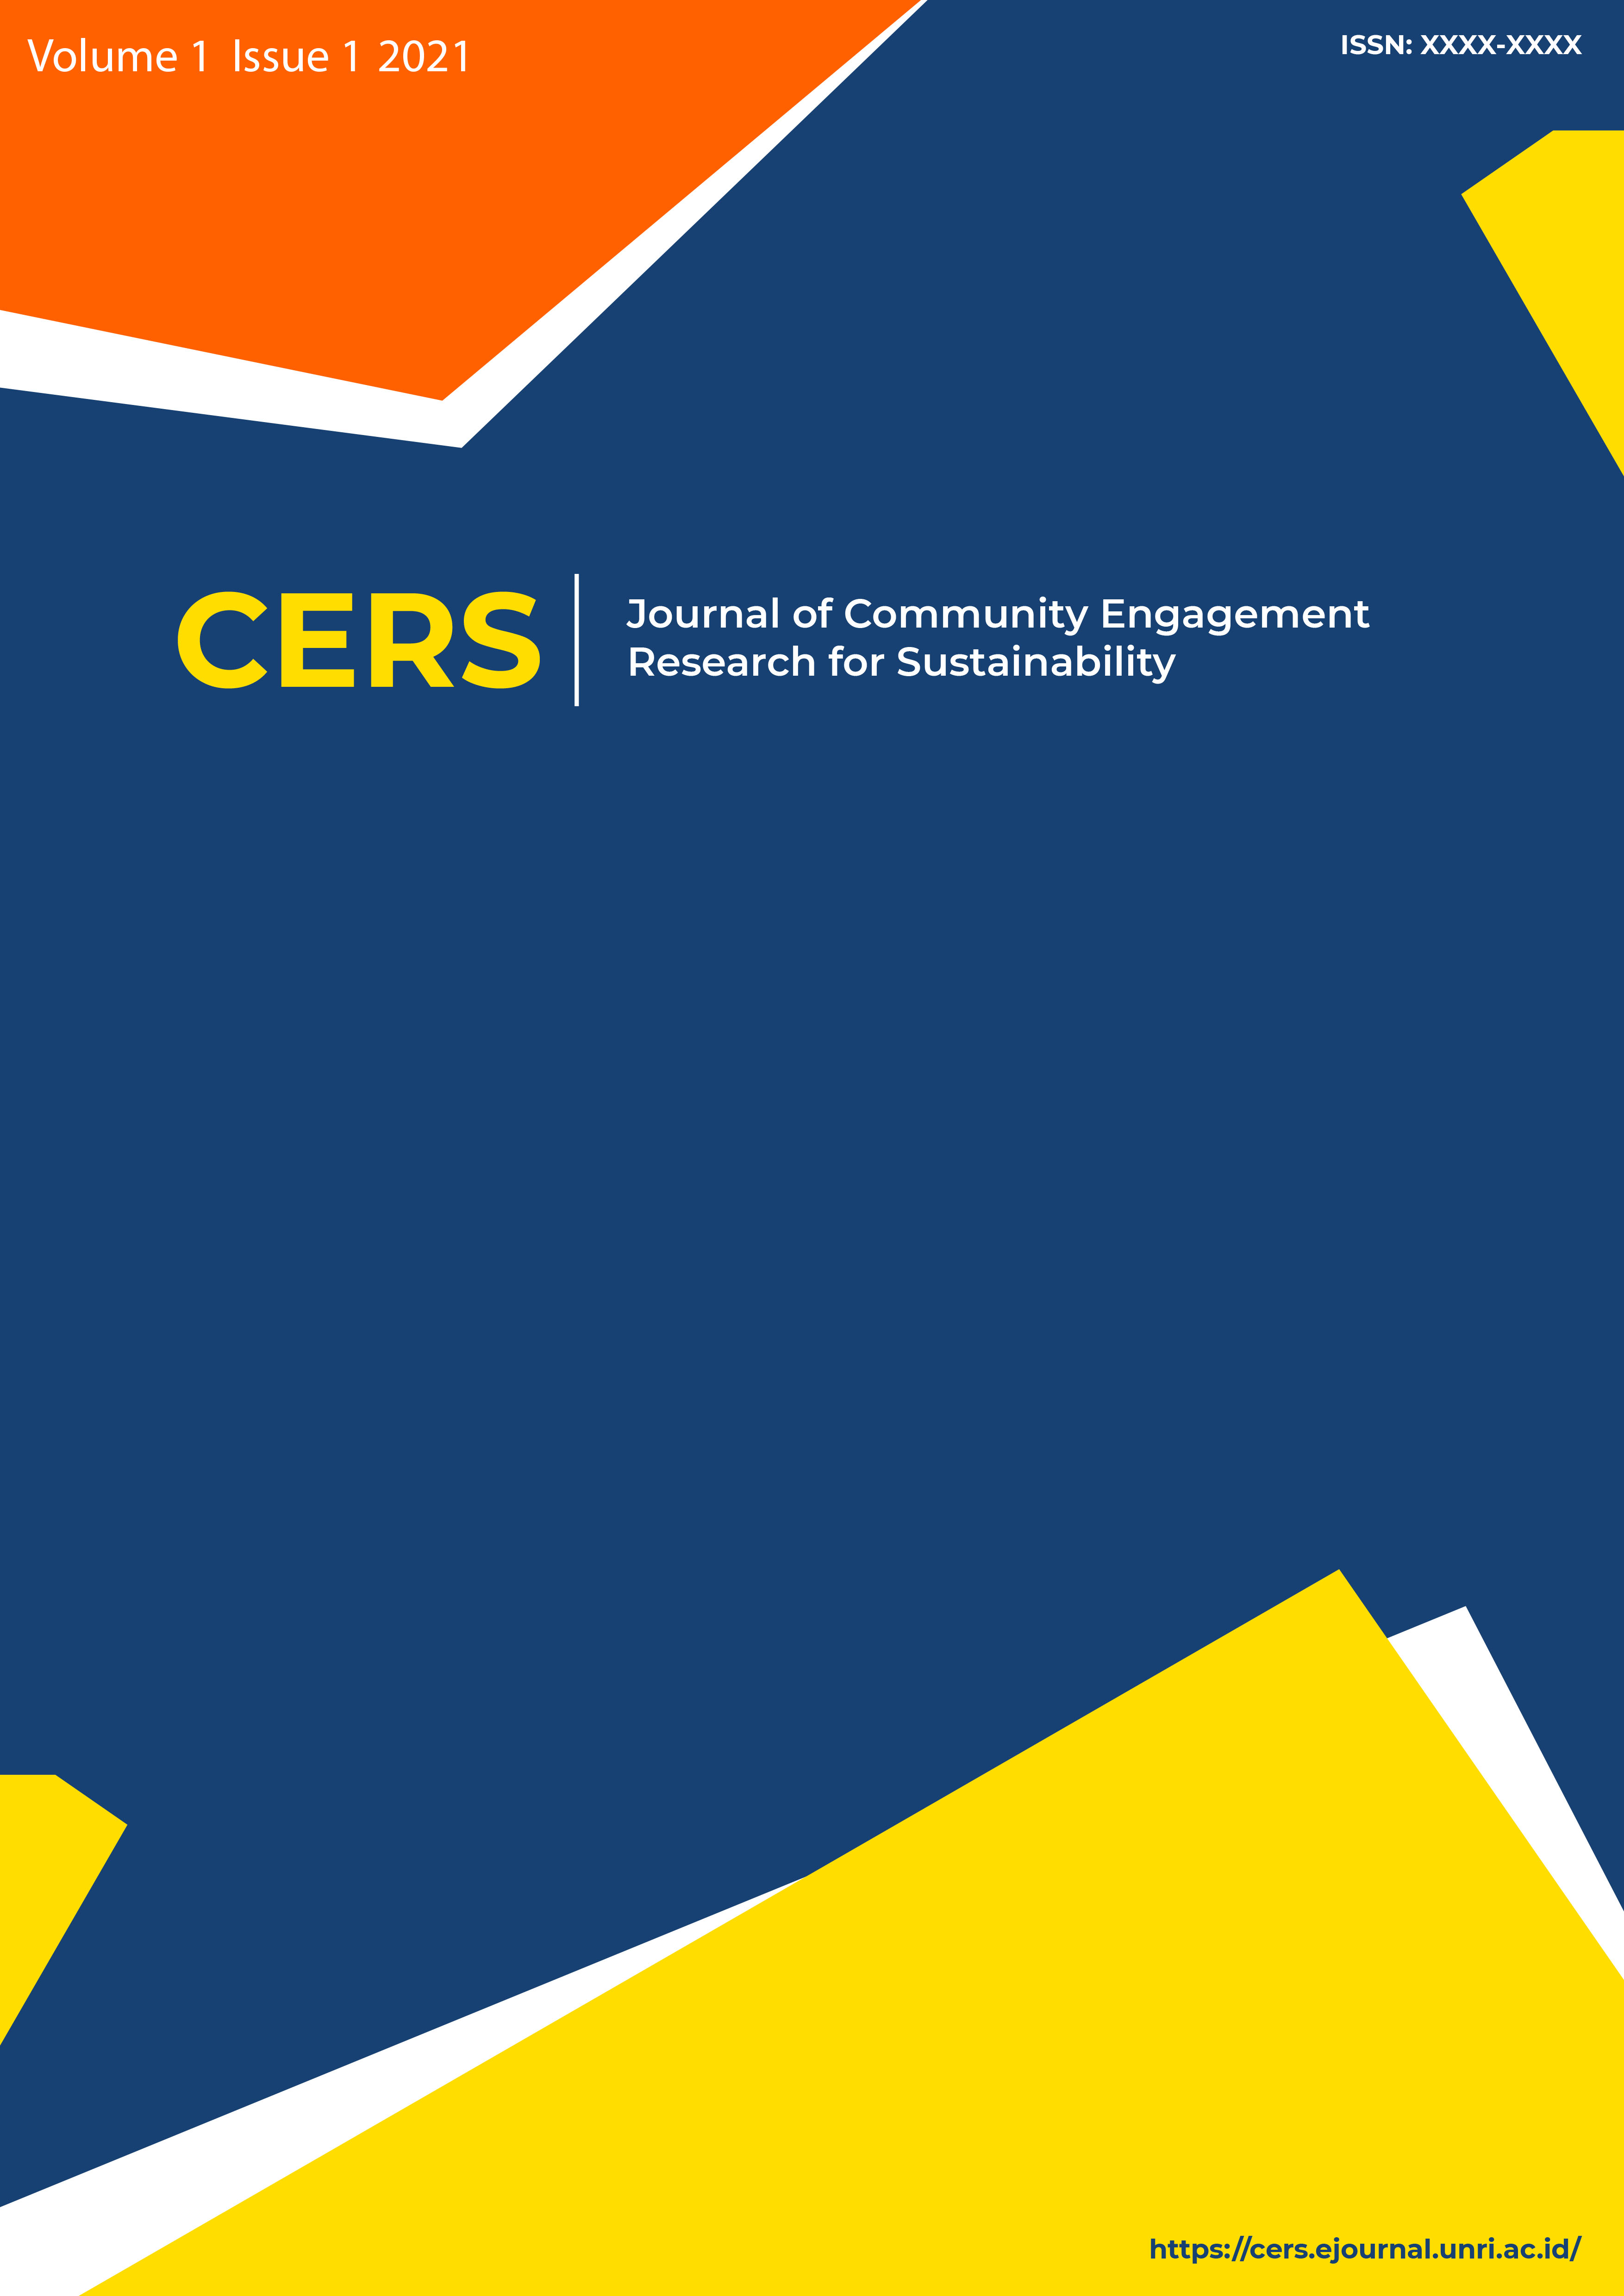 Journal of Community Engagement Research for Sustainability